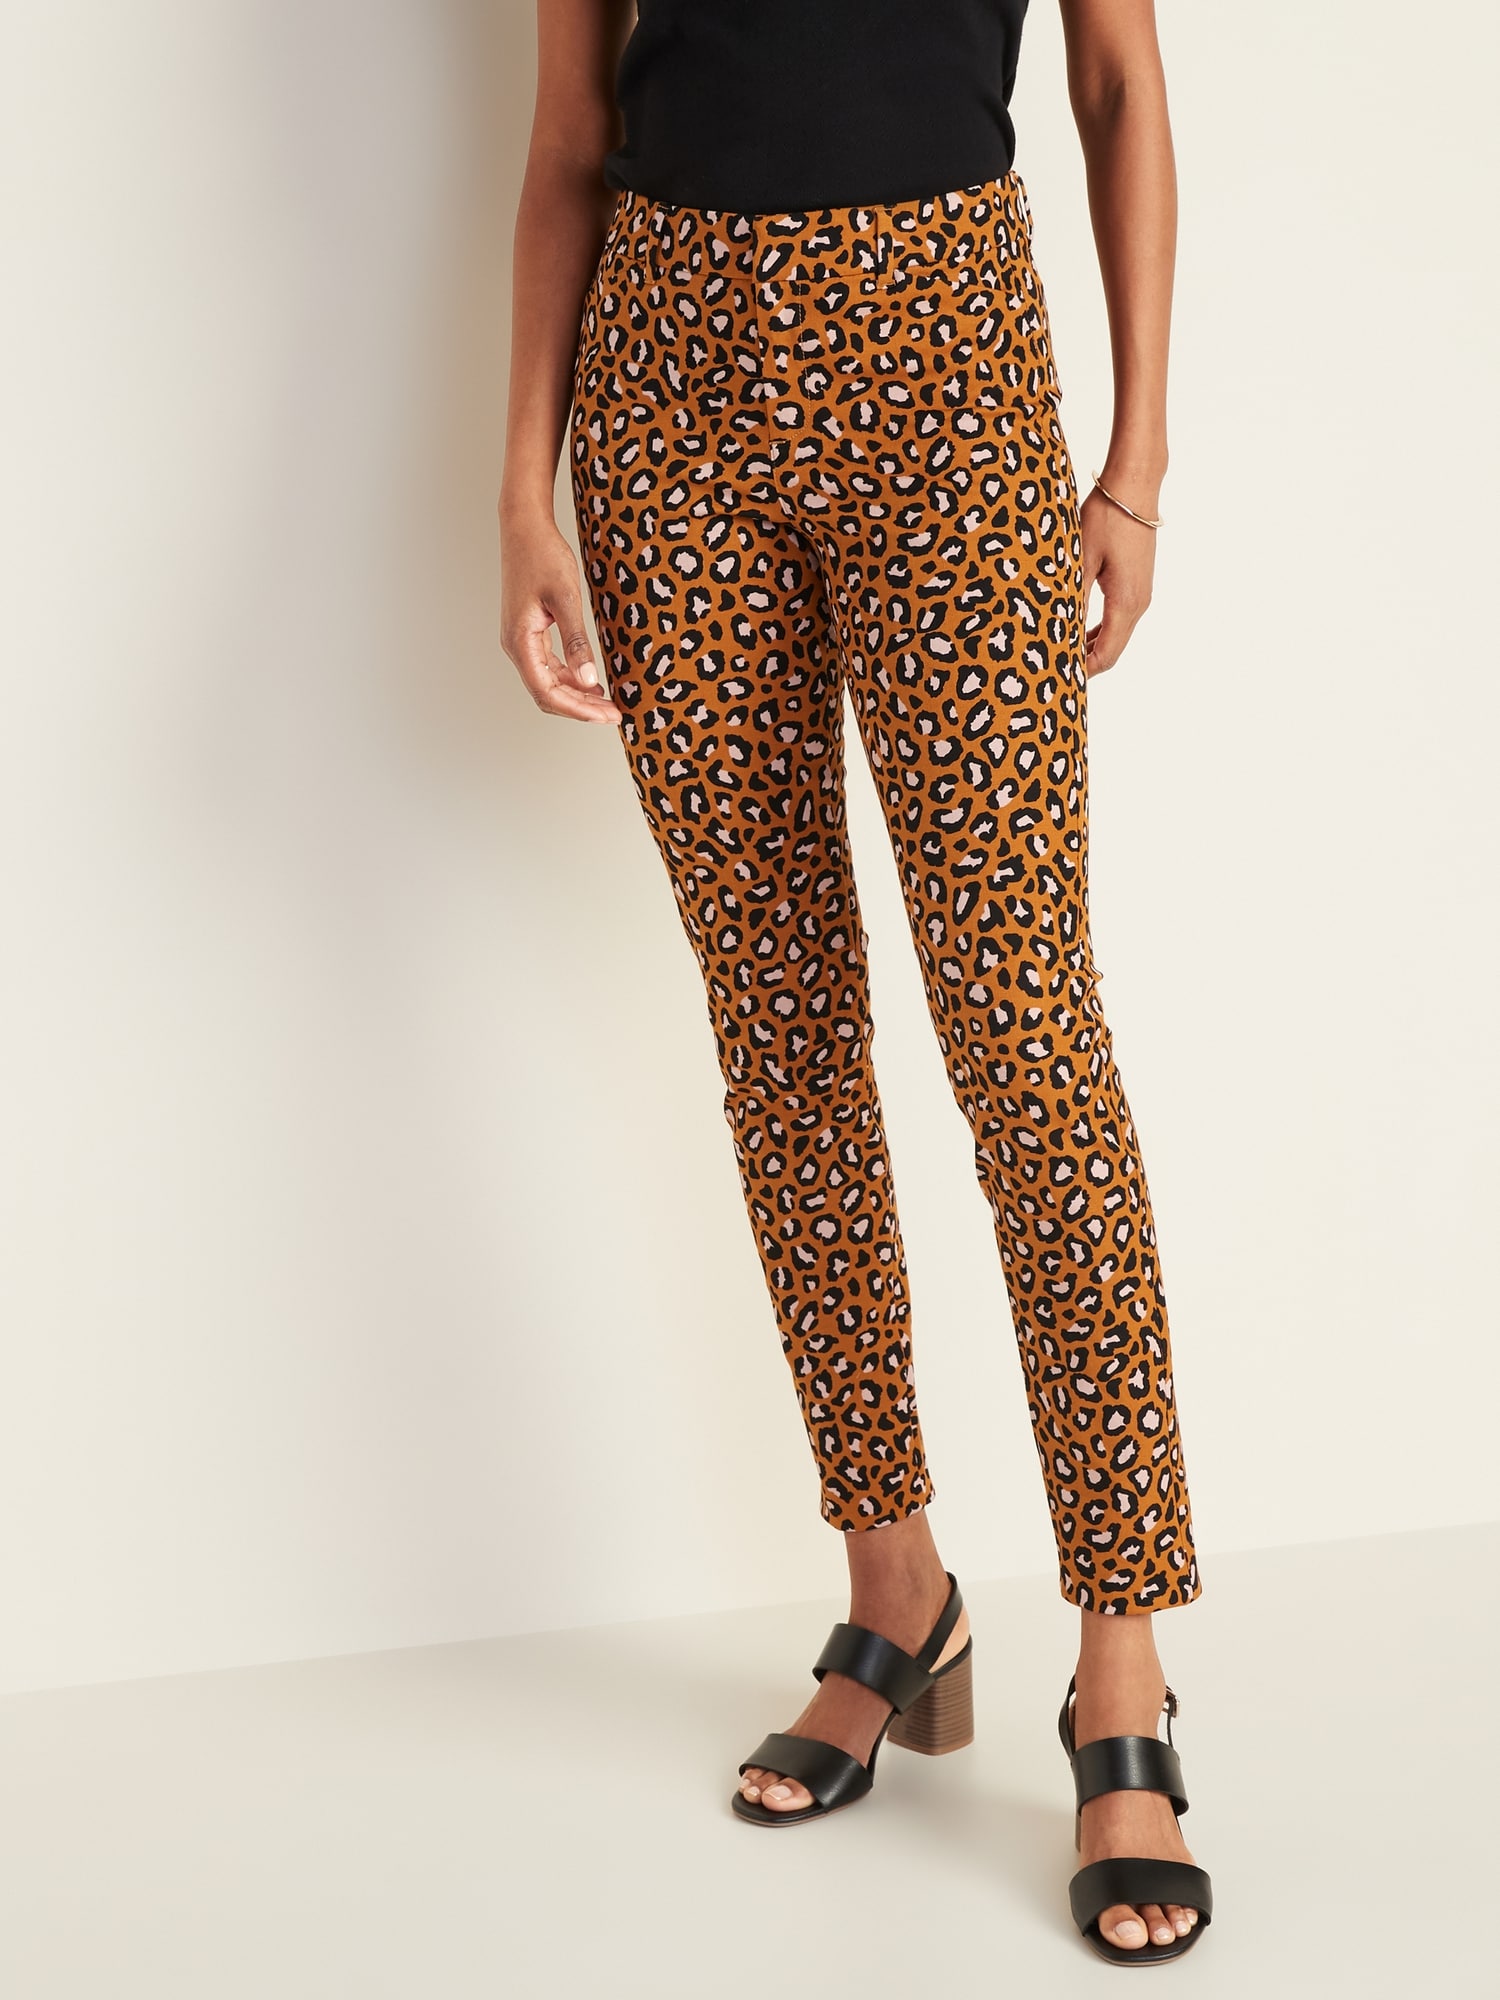 Mid-Rise Printed Pixie Ankle Pants for Women, $29